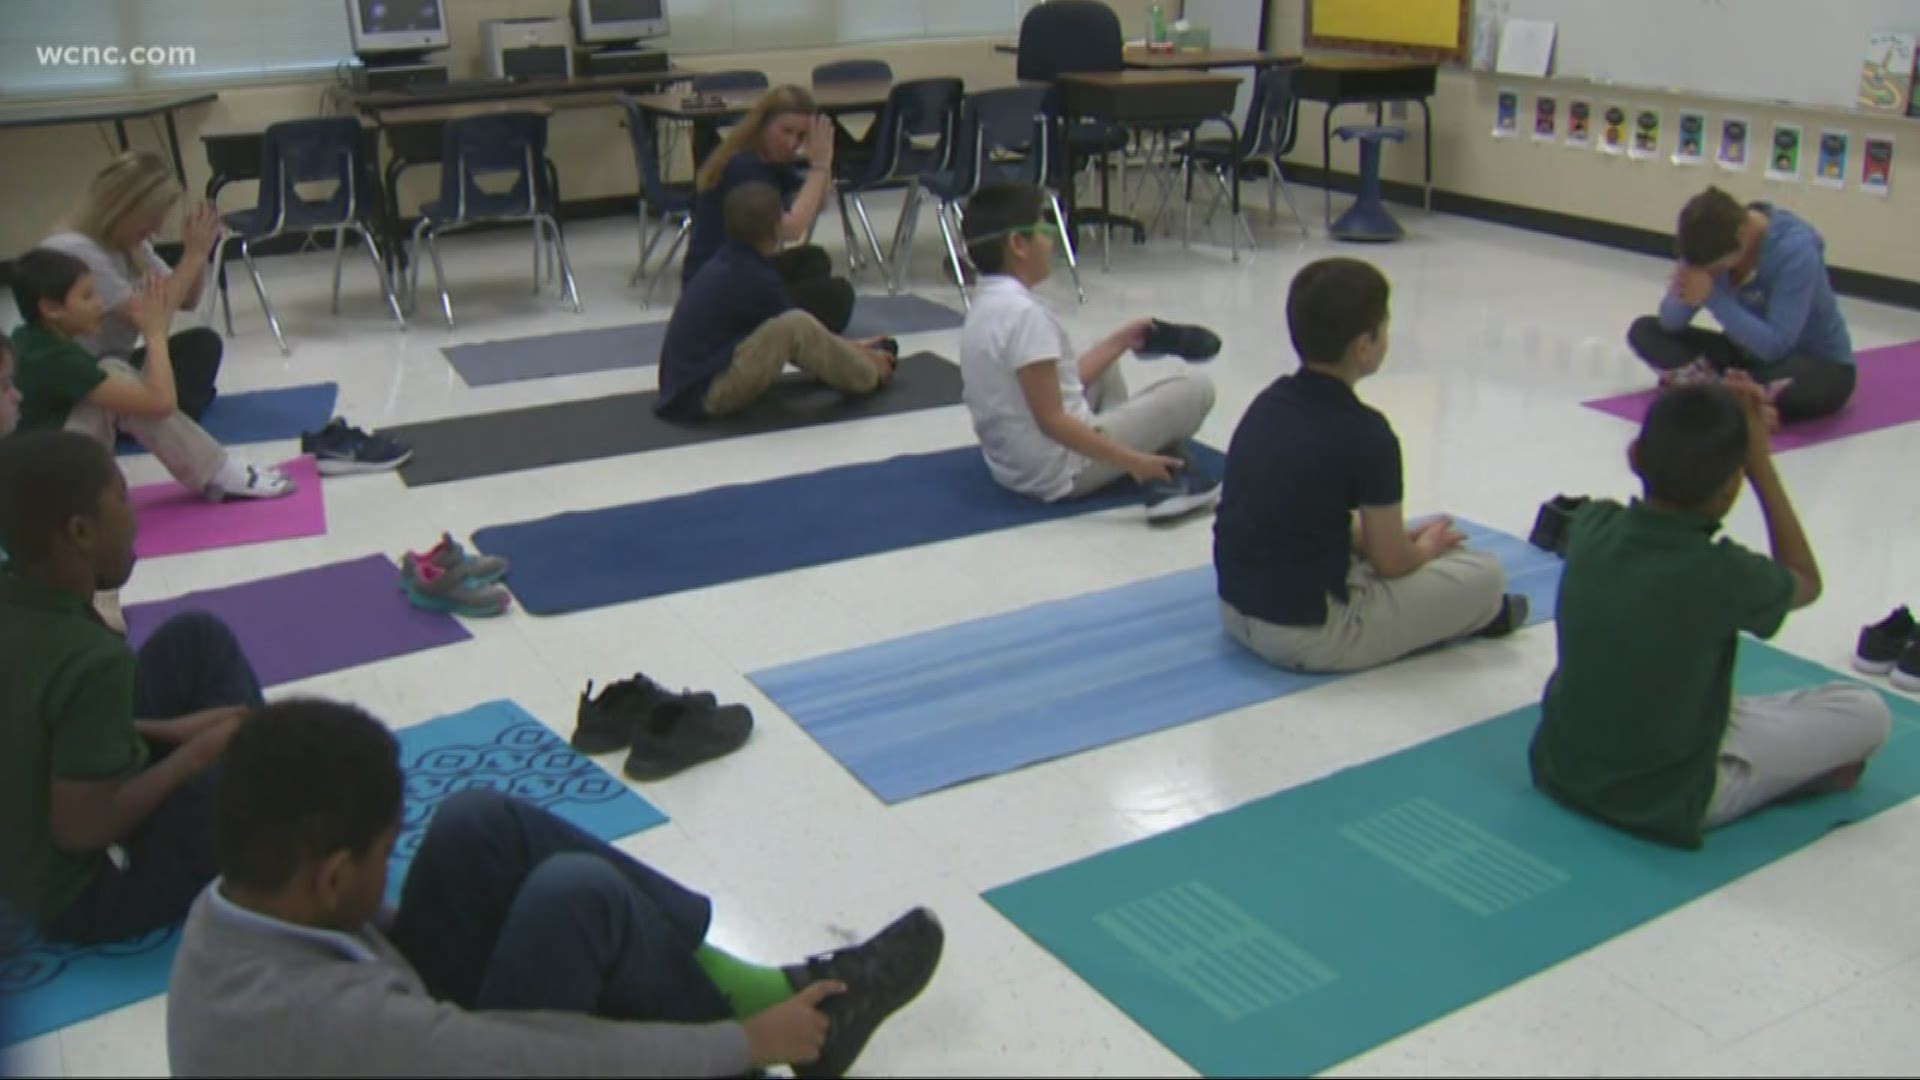 Exceptional Yoga is an in-school yoga program for those with special needs.